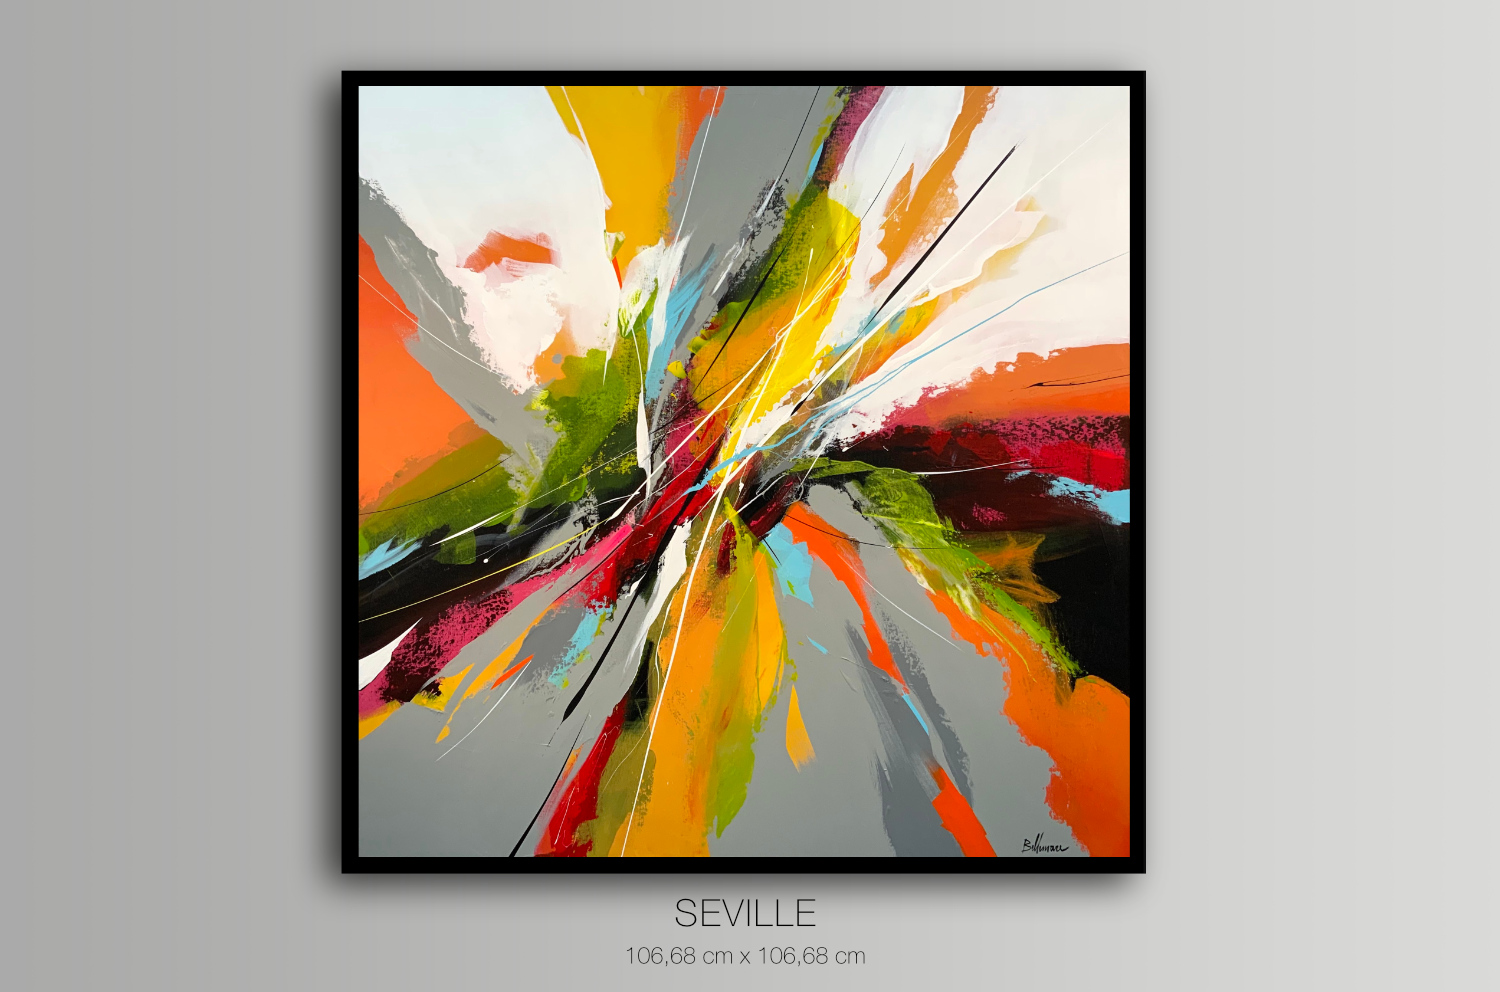 Seville - Featured